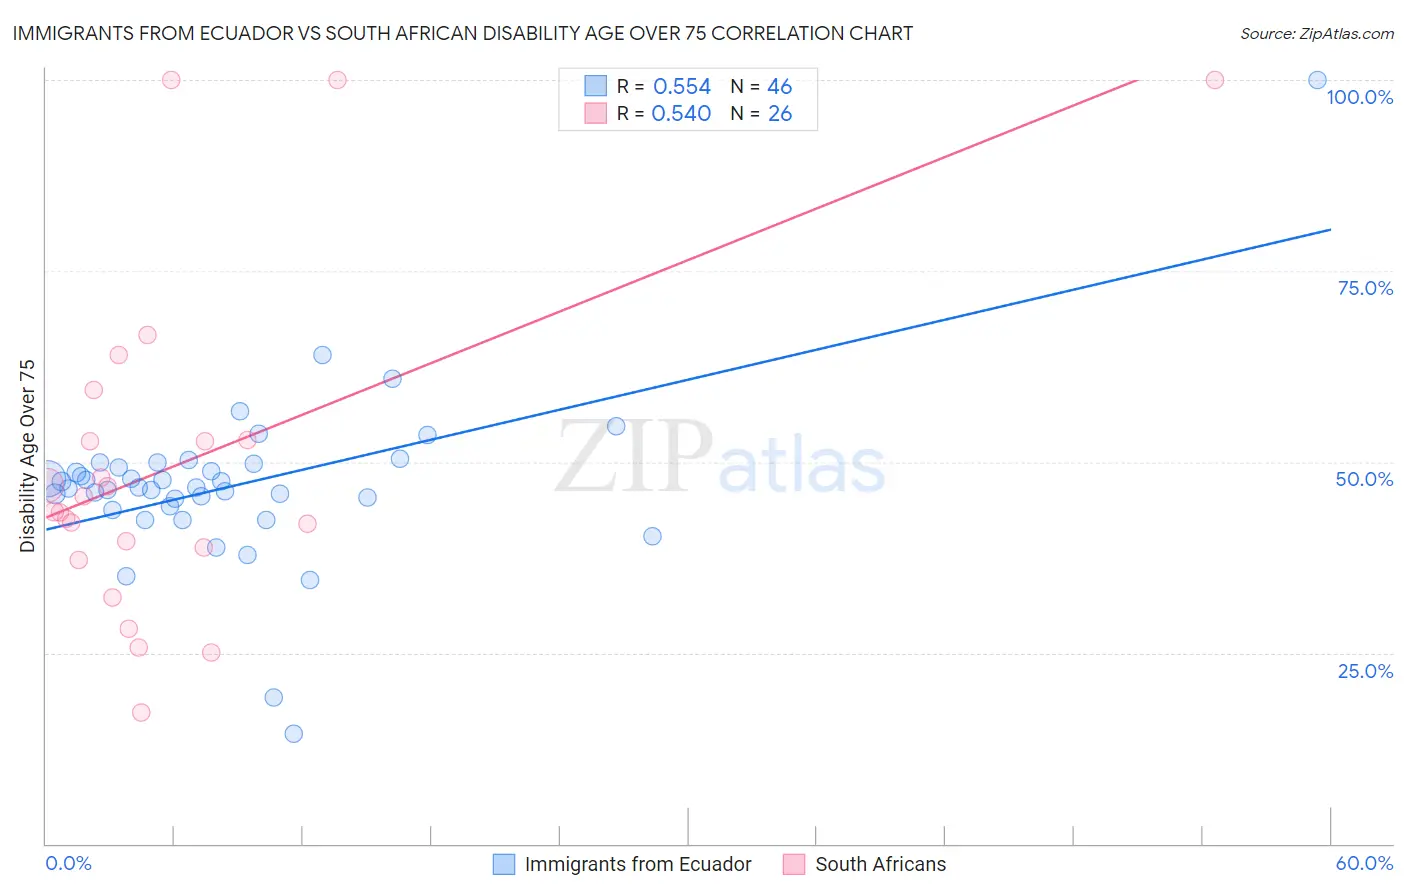 Immigrants from Ecuador vs South African Disability Age Over 75